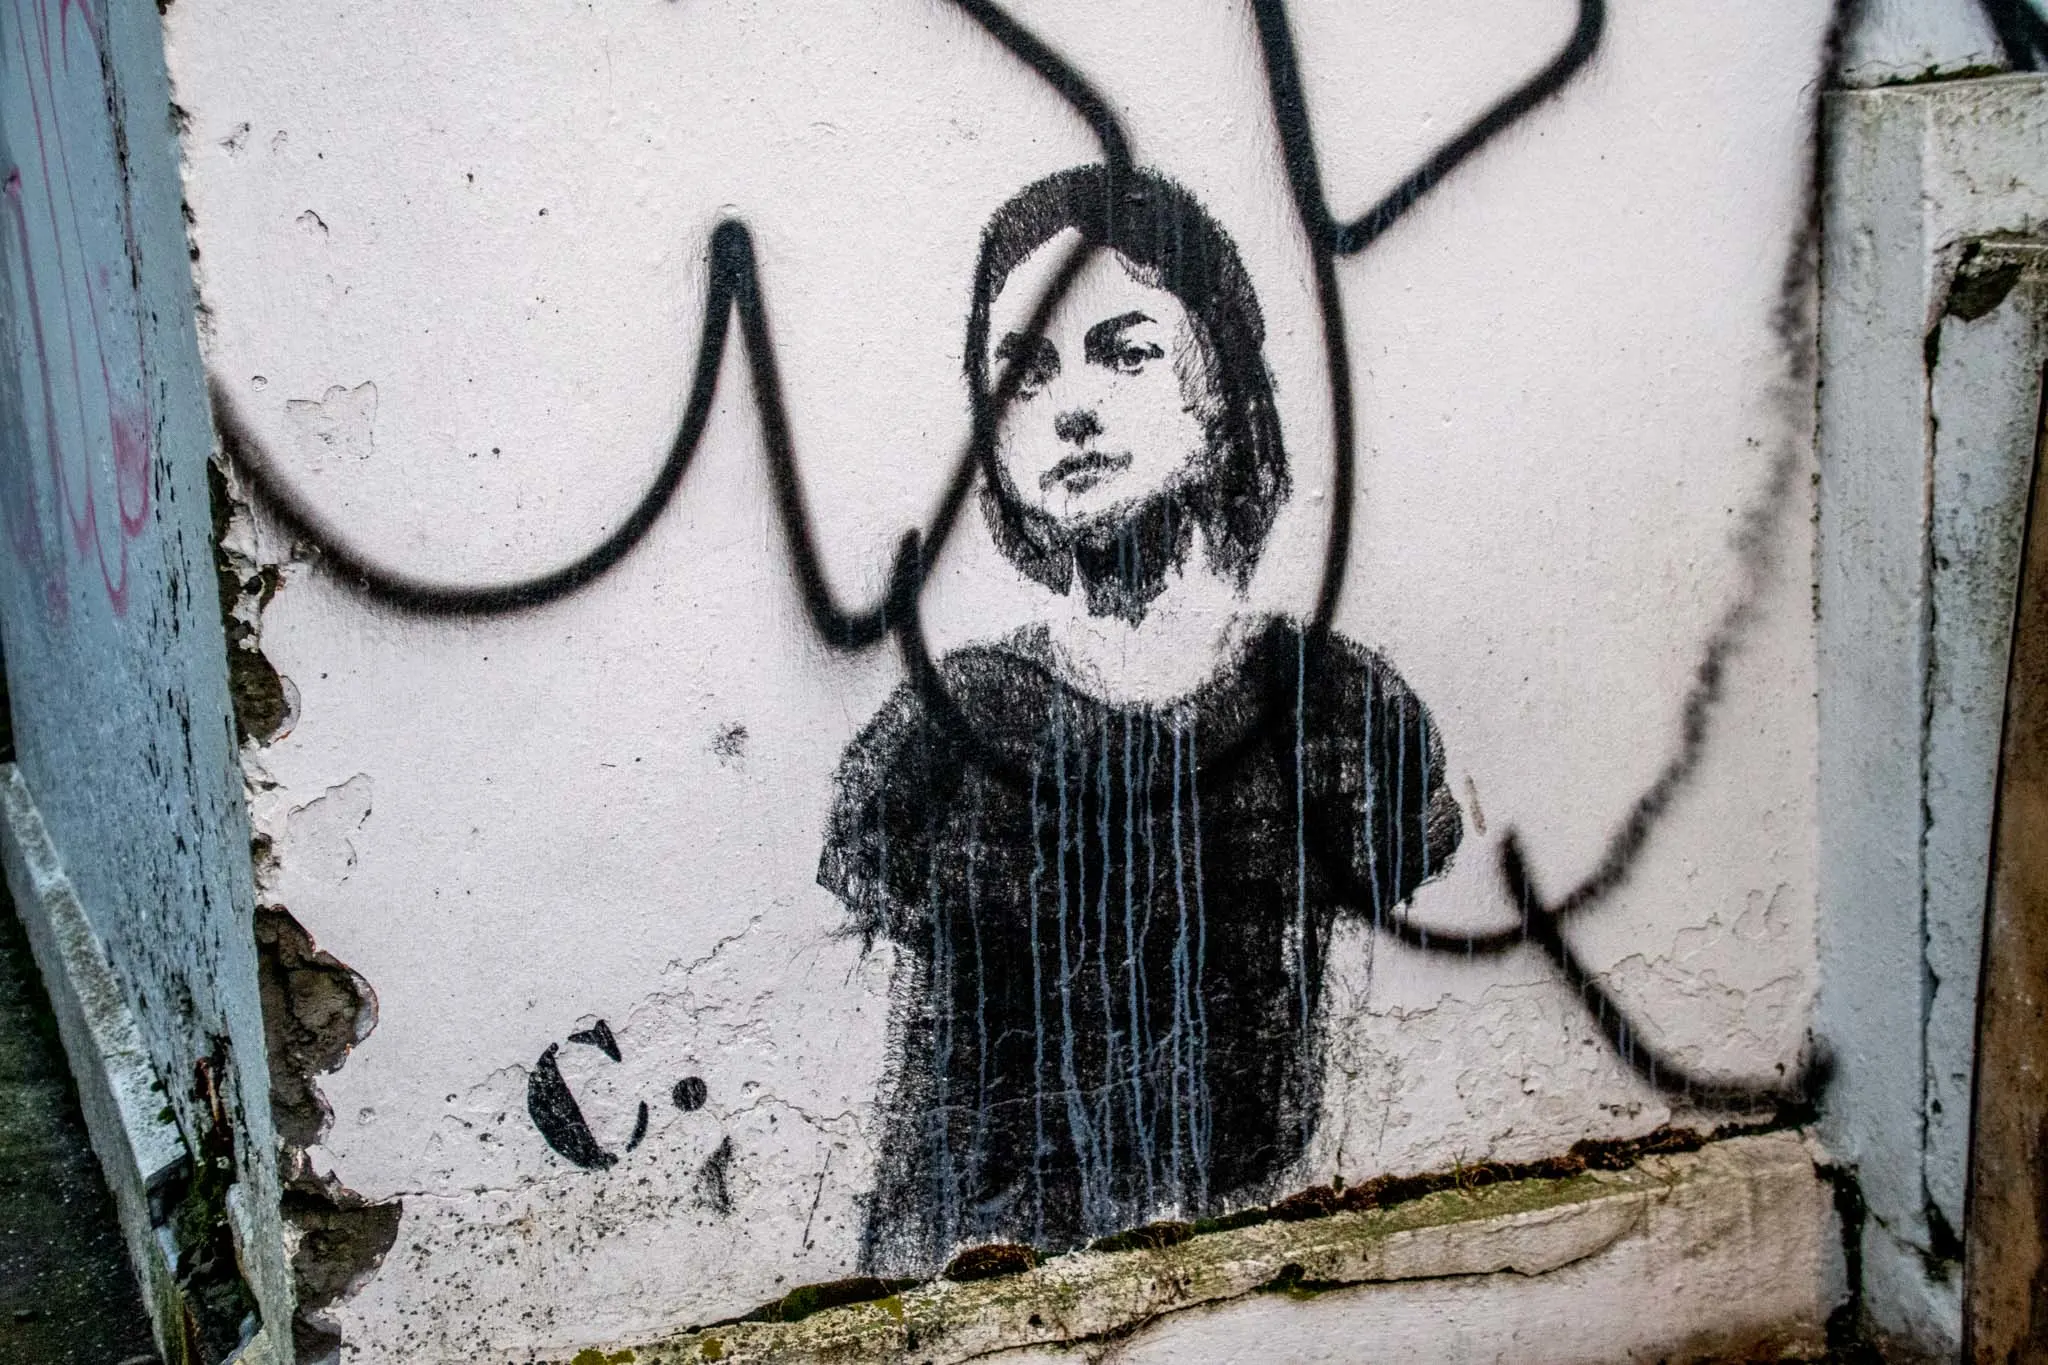 Street art stencil works like this young girl are seen in the Icelandic capital